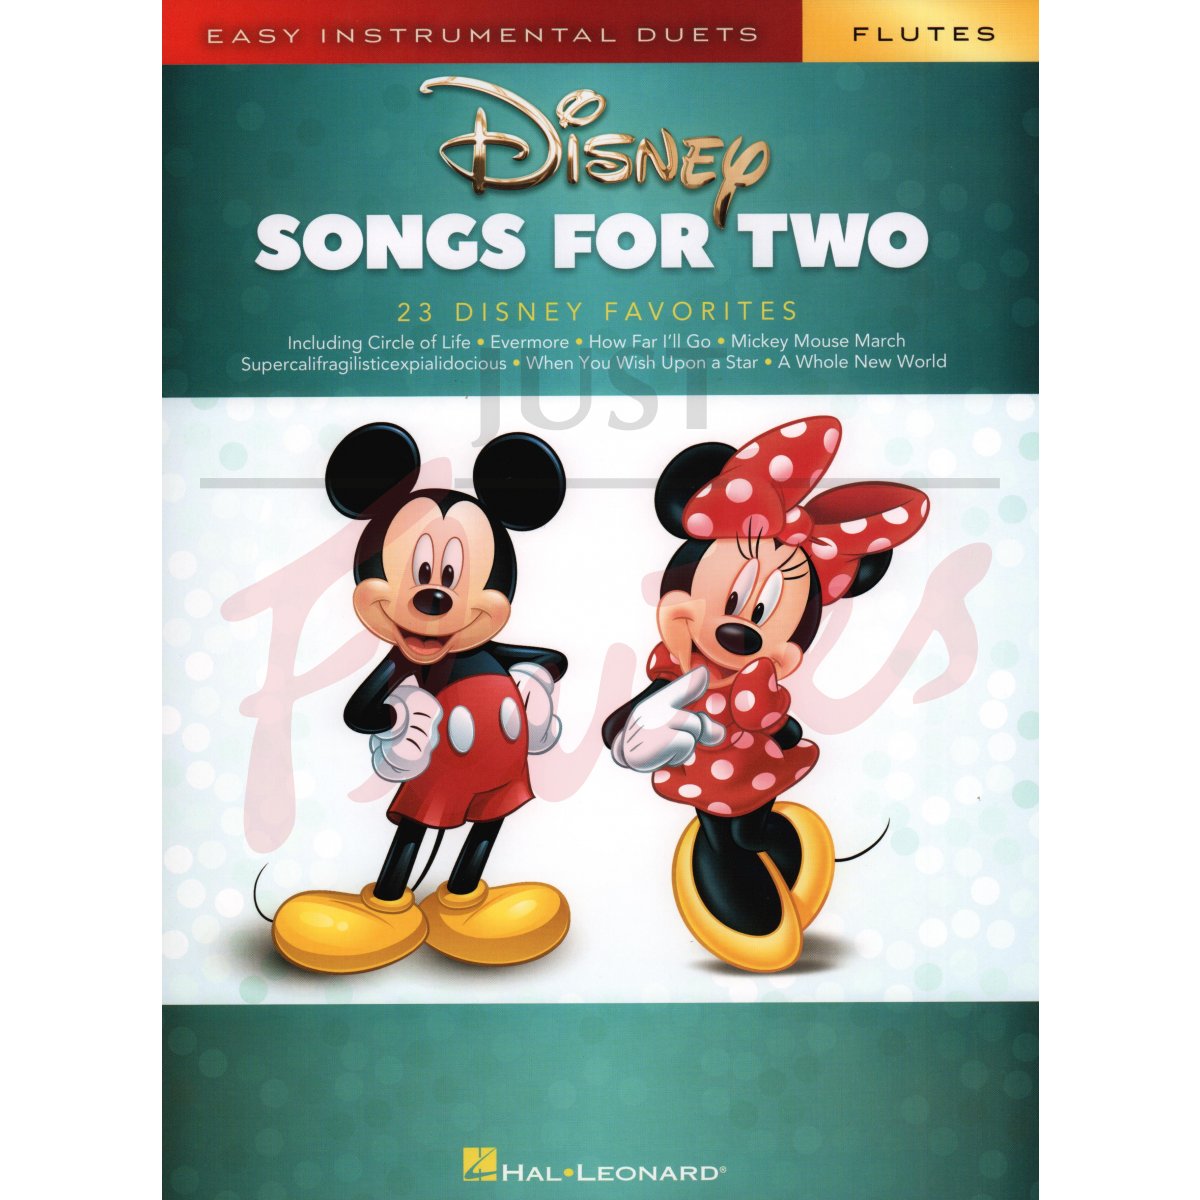 Disney Songs for Two Flutes